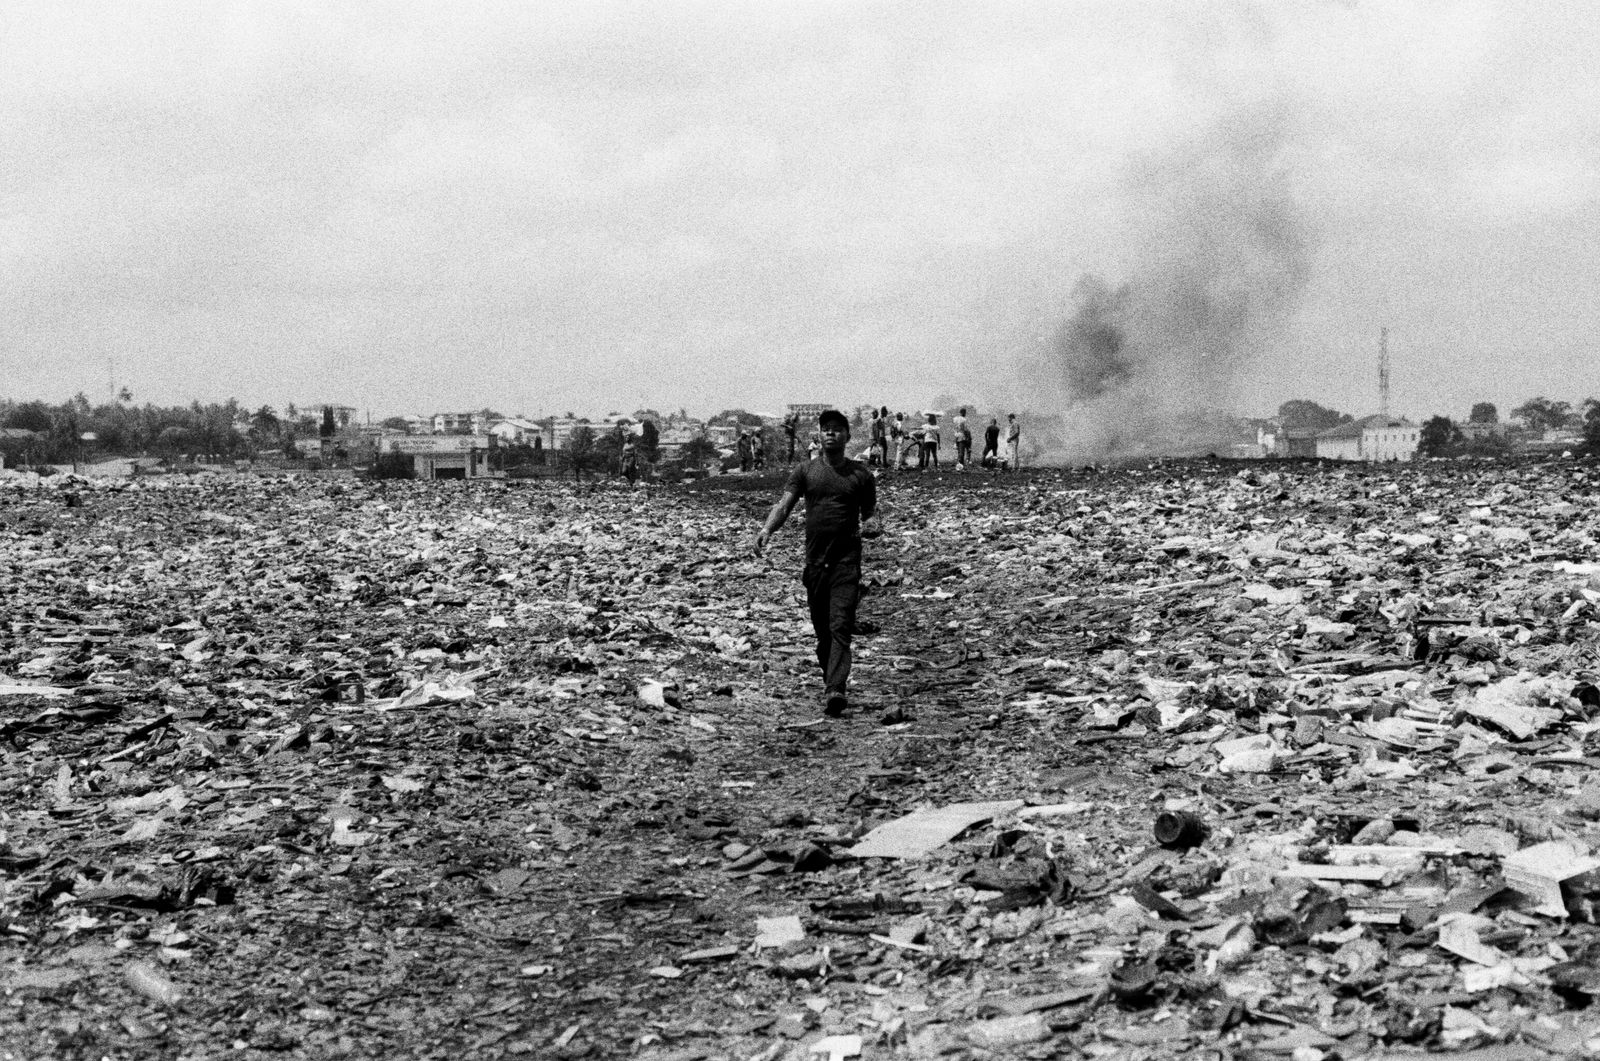 © carolina rapezzi - Accra, Agbogbloshie. A worker leaving from one of the burning areas of the filed.